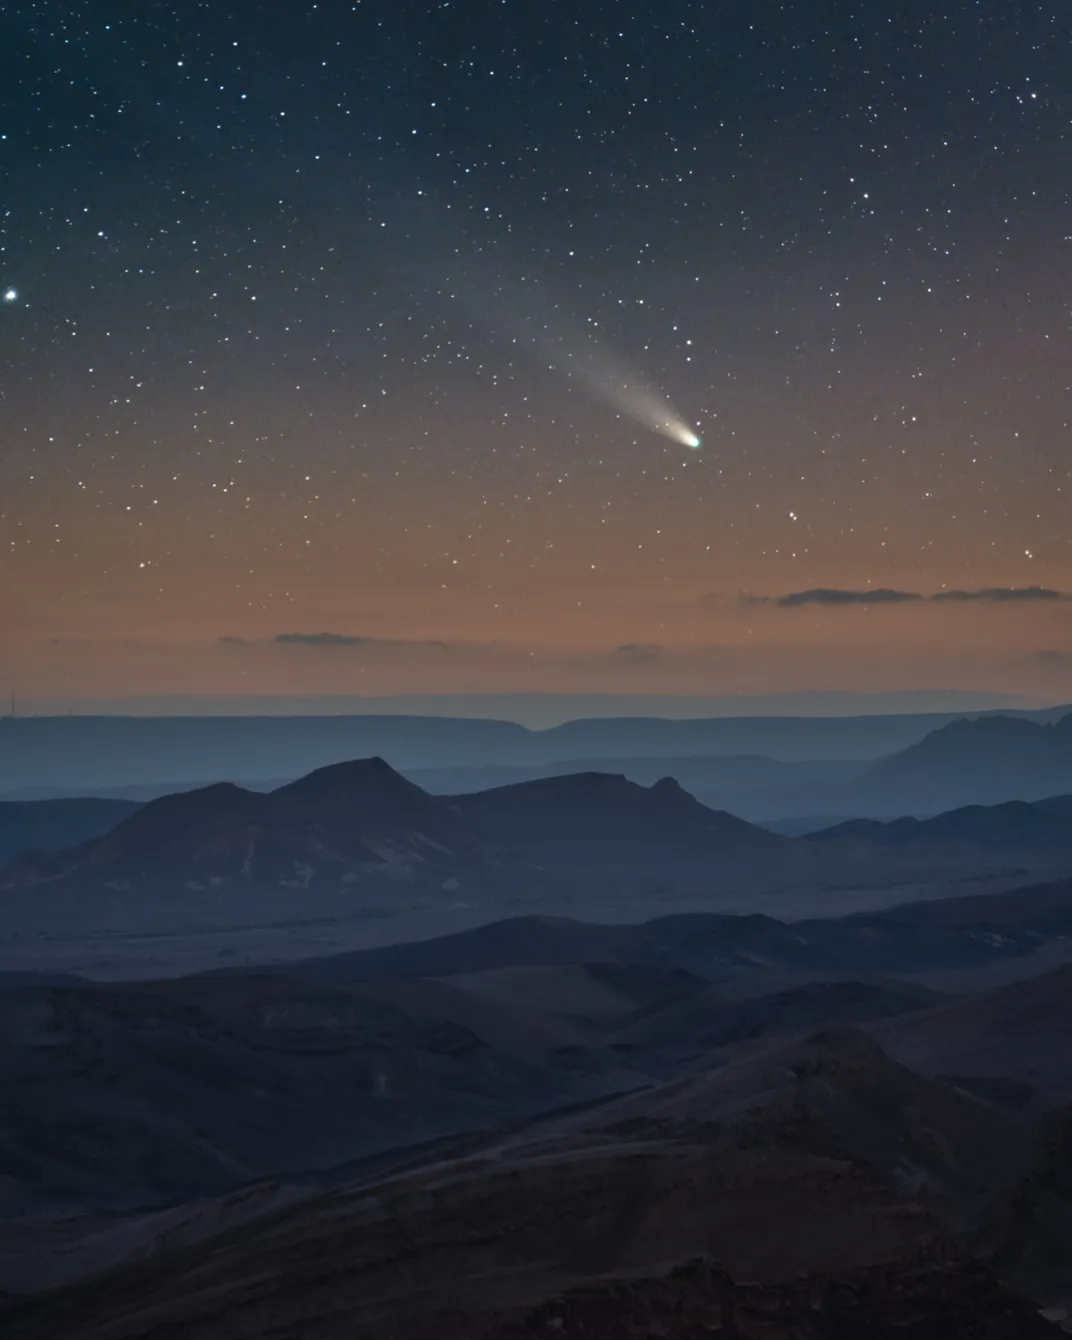 a comet streaks white above mountains of sand in a desert. the sky appears orange and stars are flecks of light